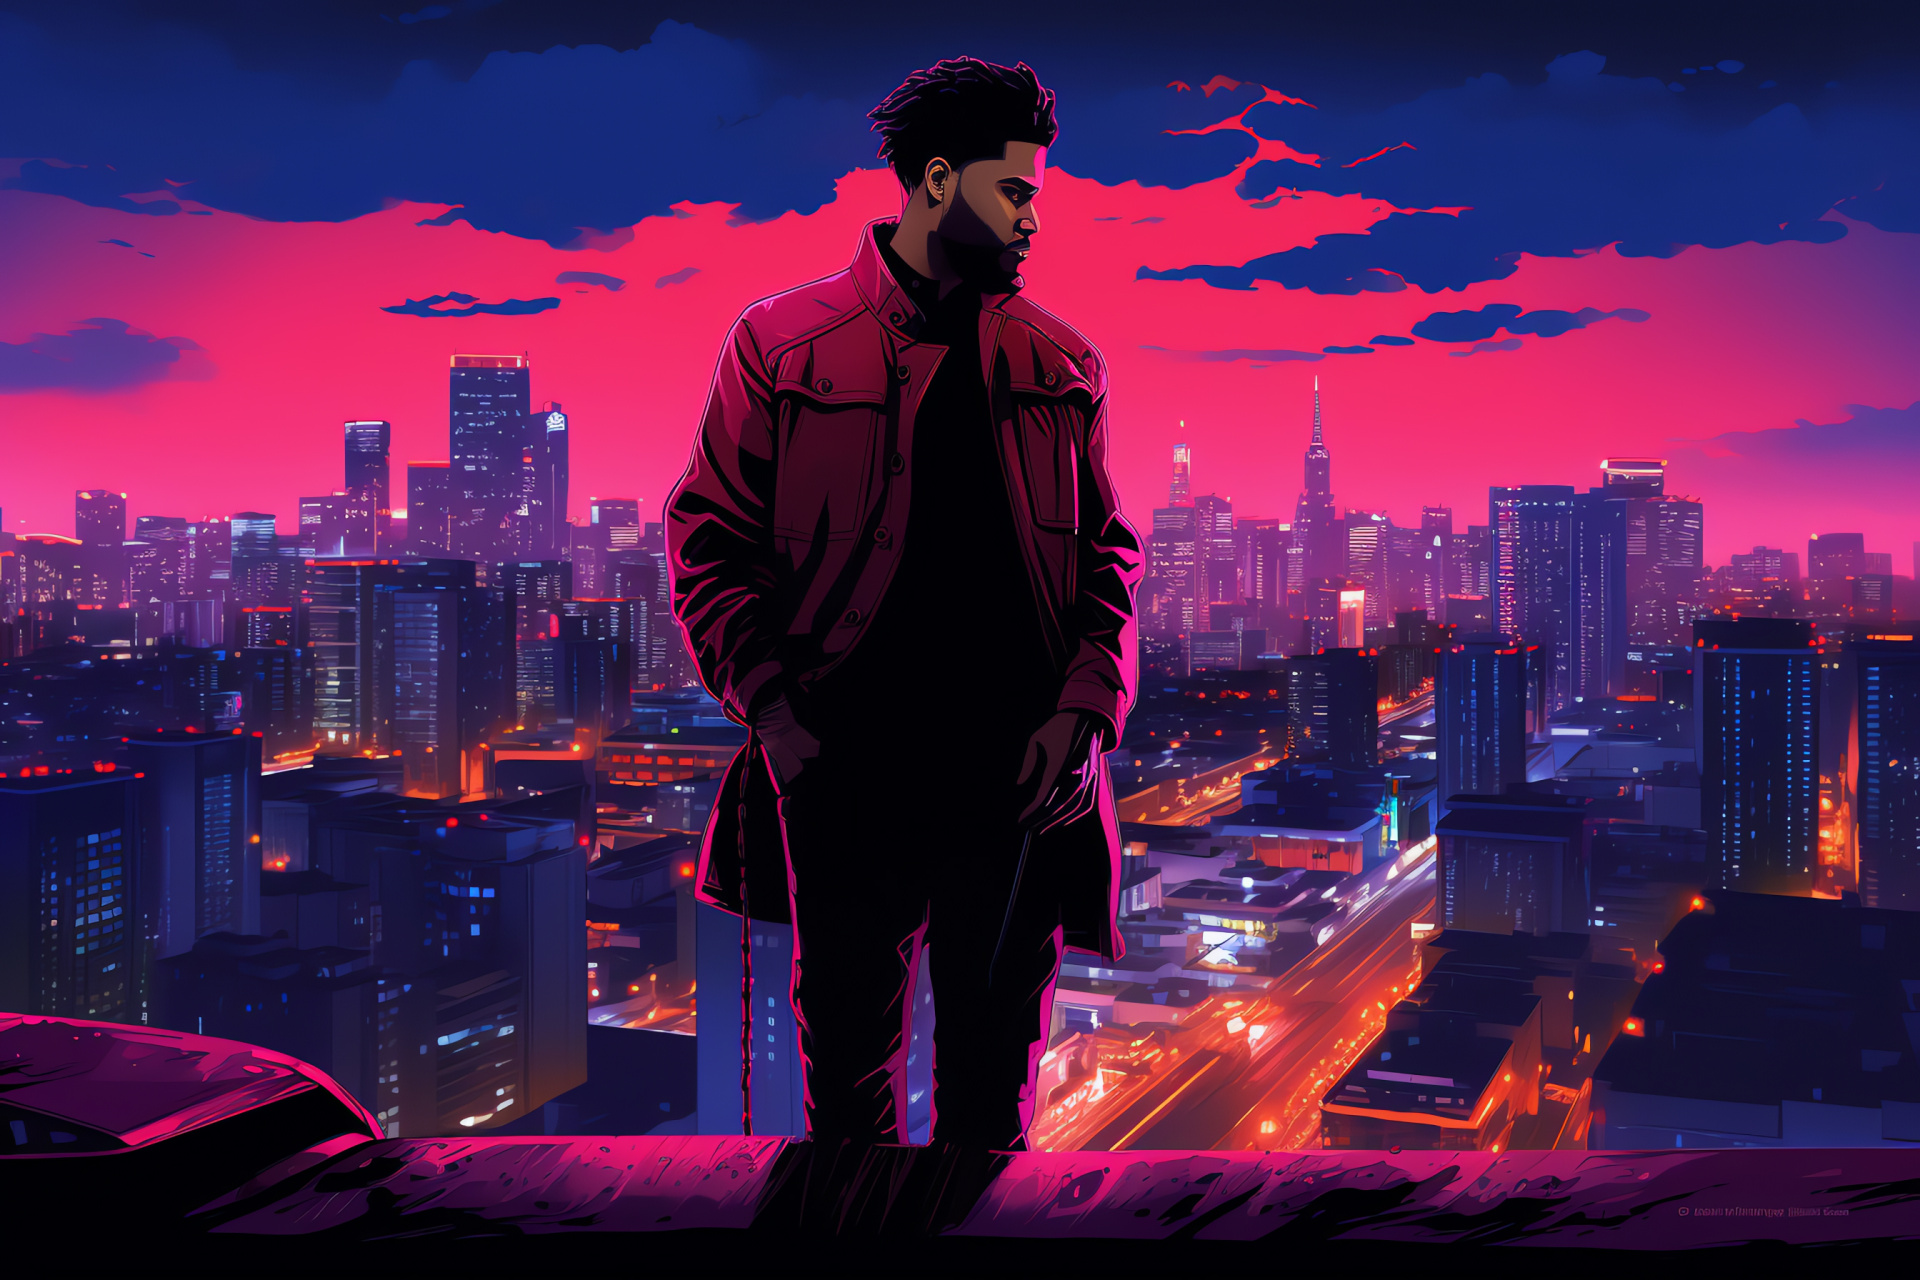 The Weeknd, Dazzling nightlife, City architecture, Skyline view, Evening ambience, HD Desktop Wallpaper